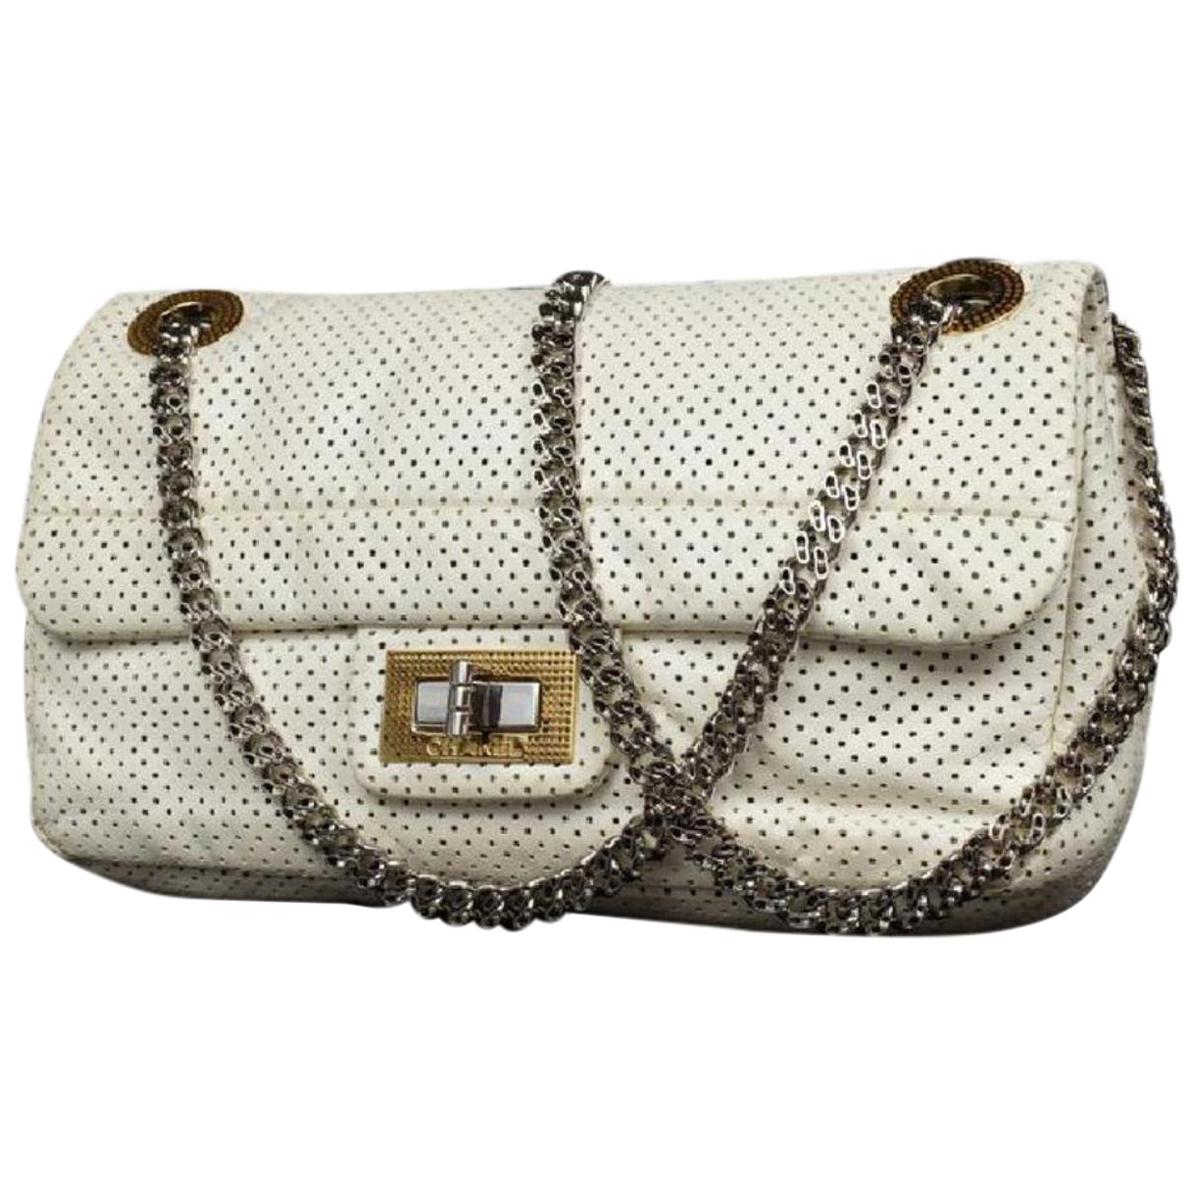 Chanel Classic Lambskin Perforated Drill Flap 217517 White Leather Shoulder Bag For Sale